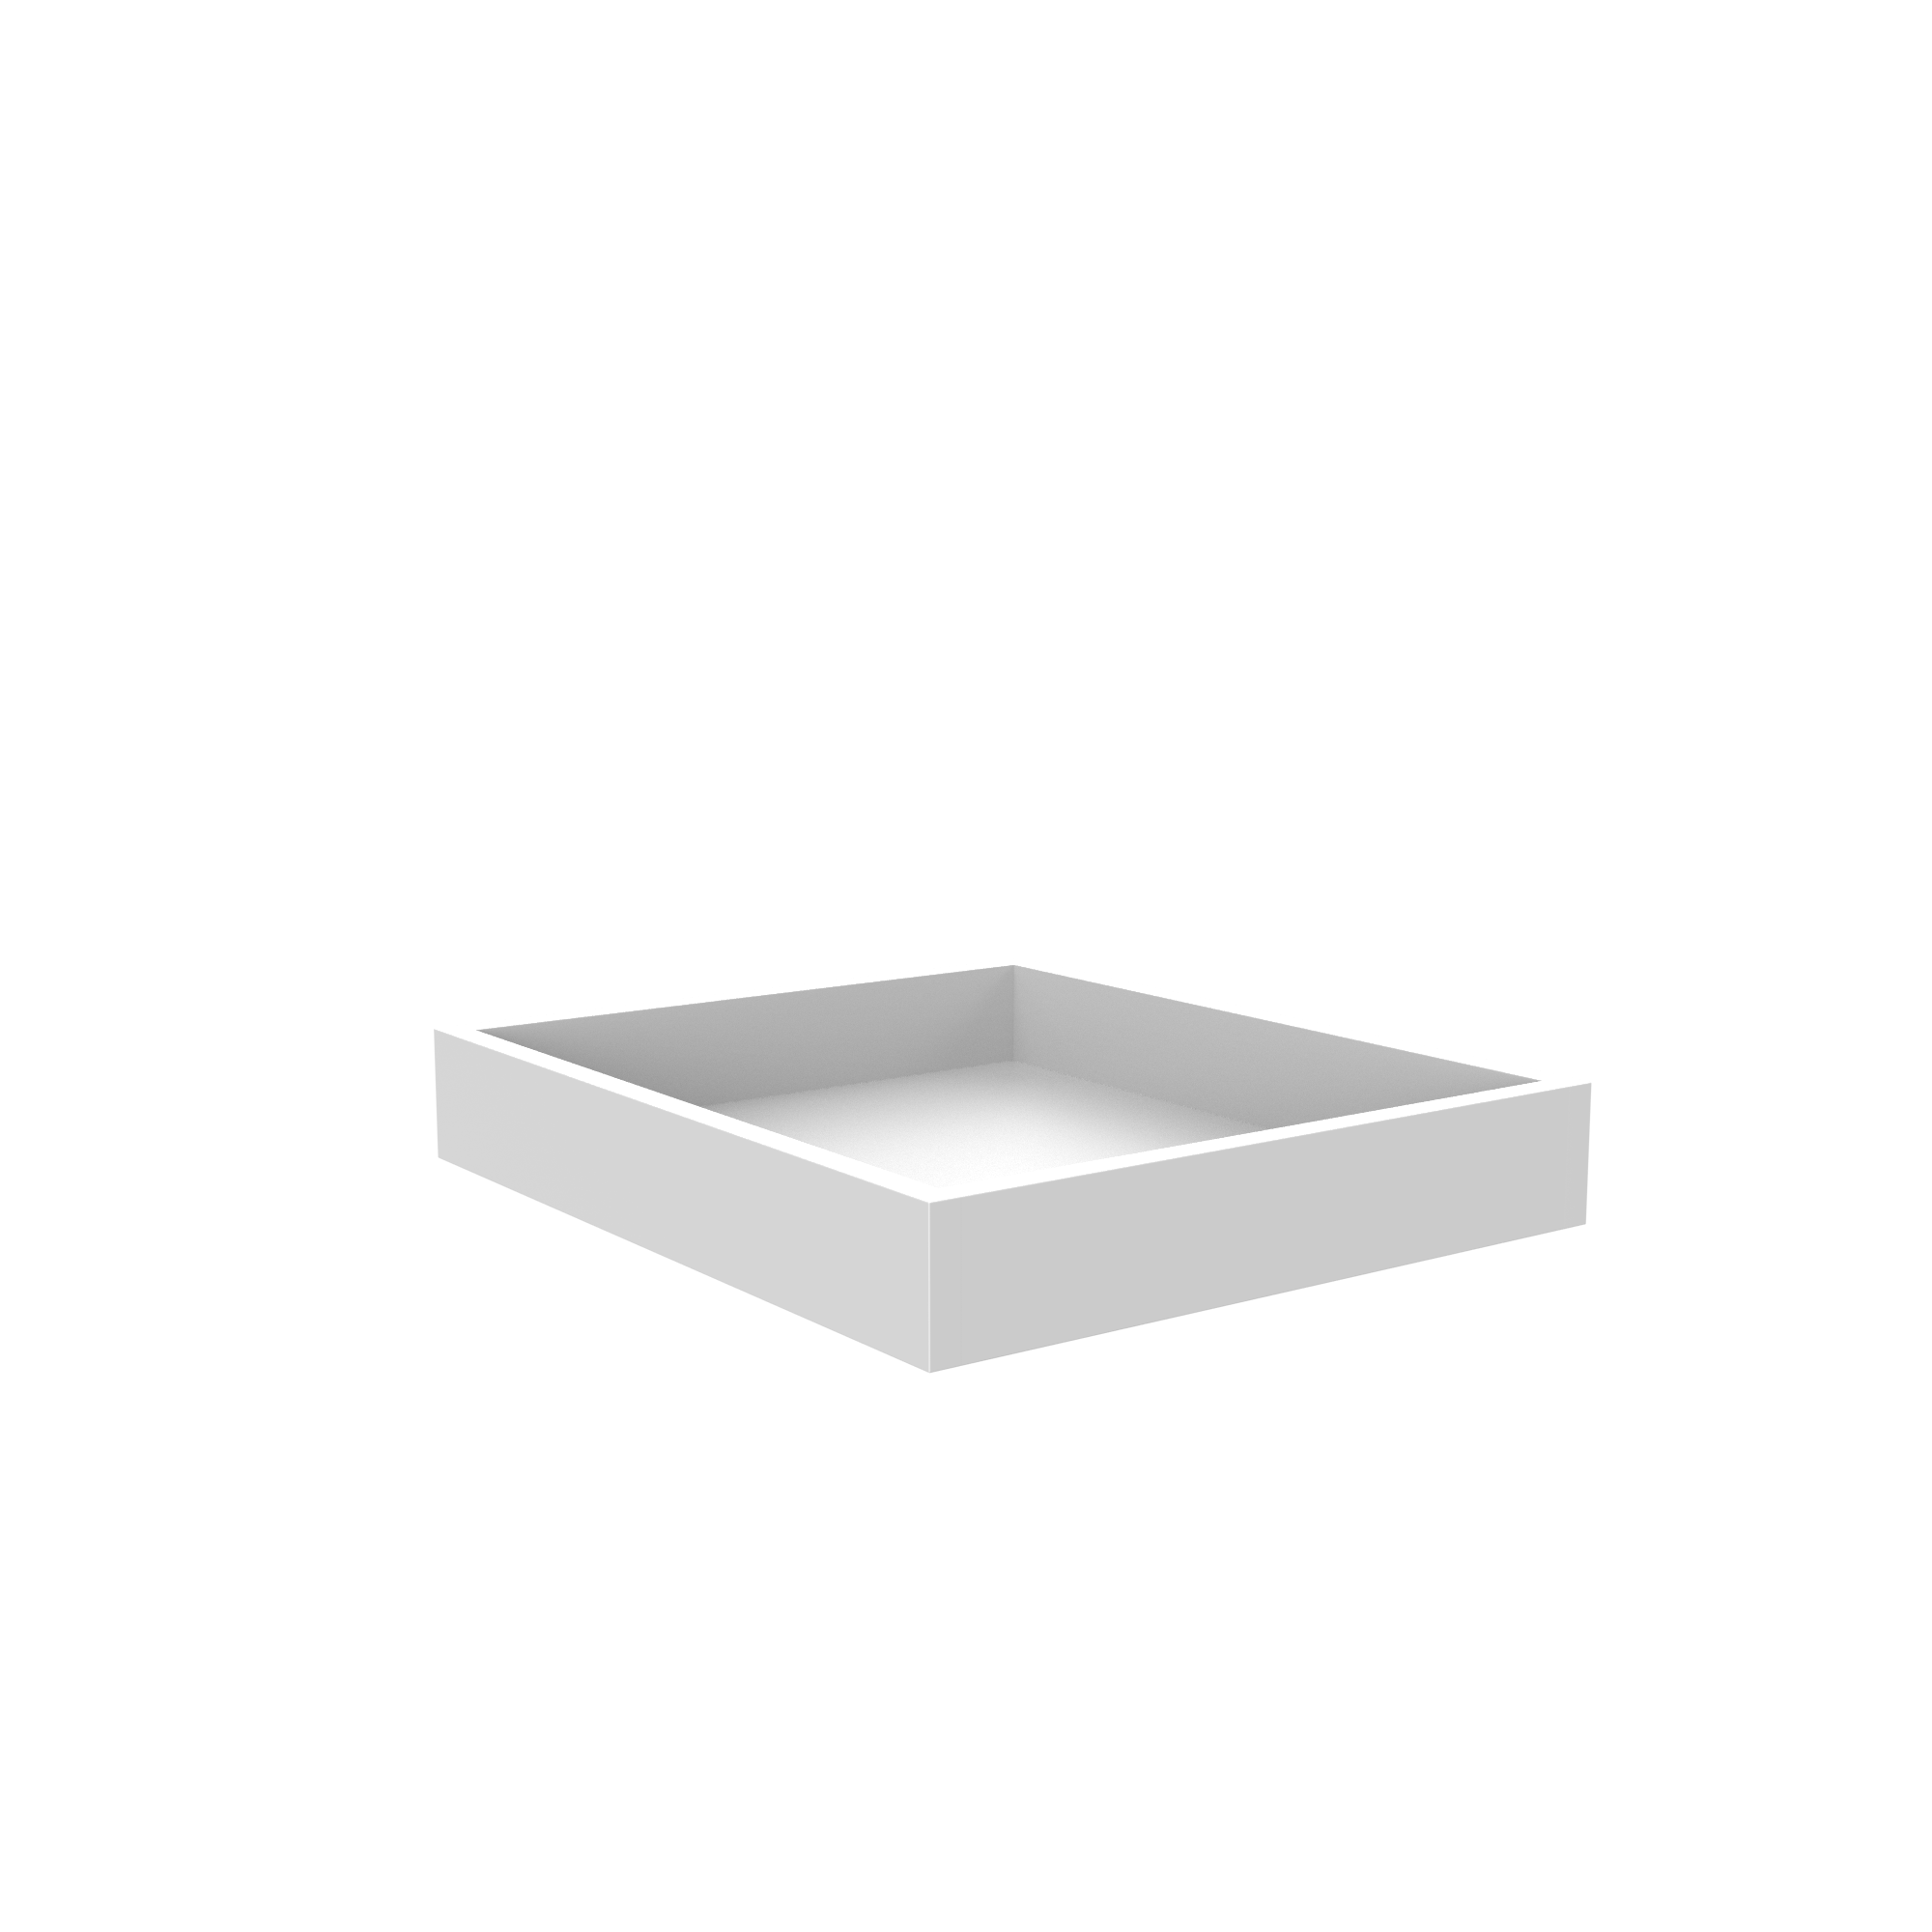 Roll Out Tray for Cabinets - Fits B18 - Aria White Shaker Cabinet - RTA